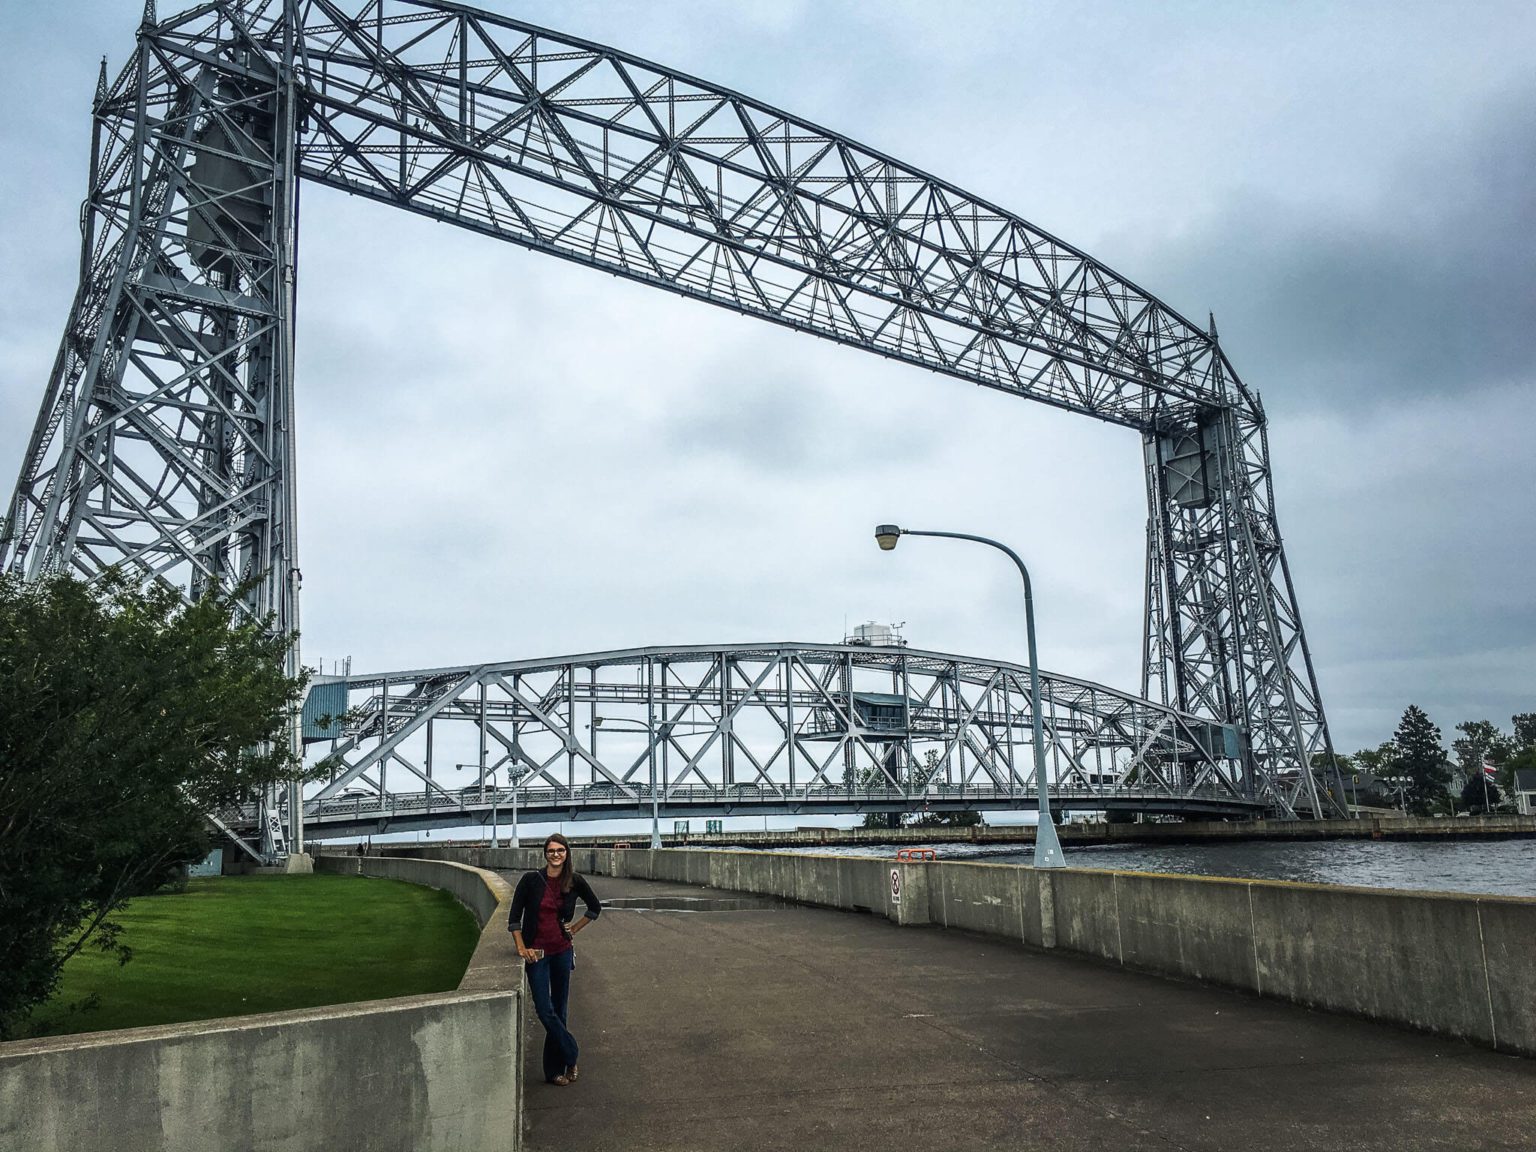 duluth mn travel guide